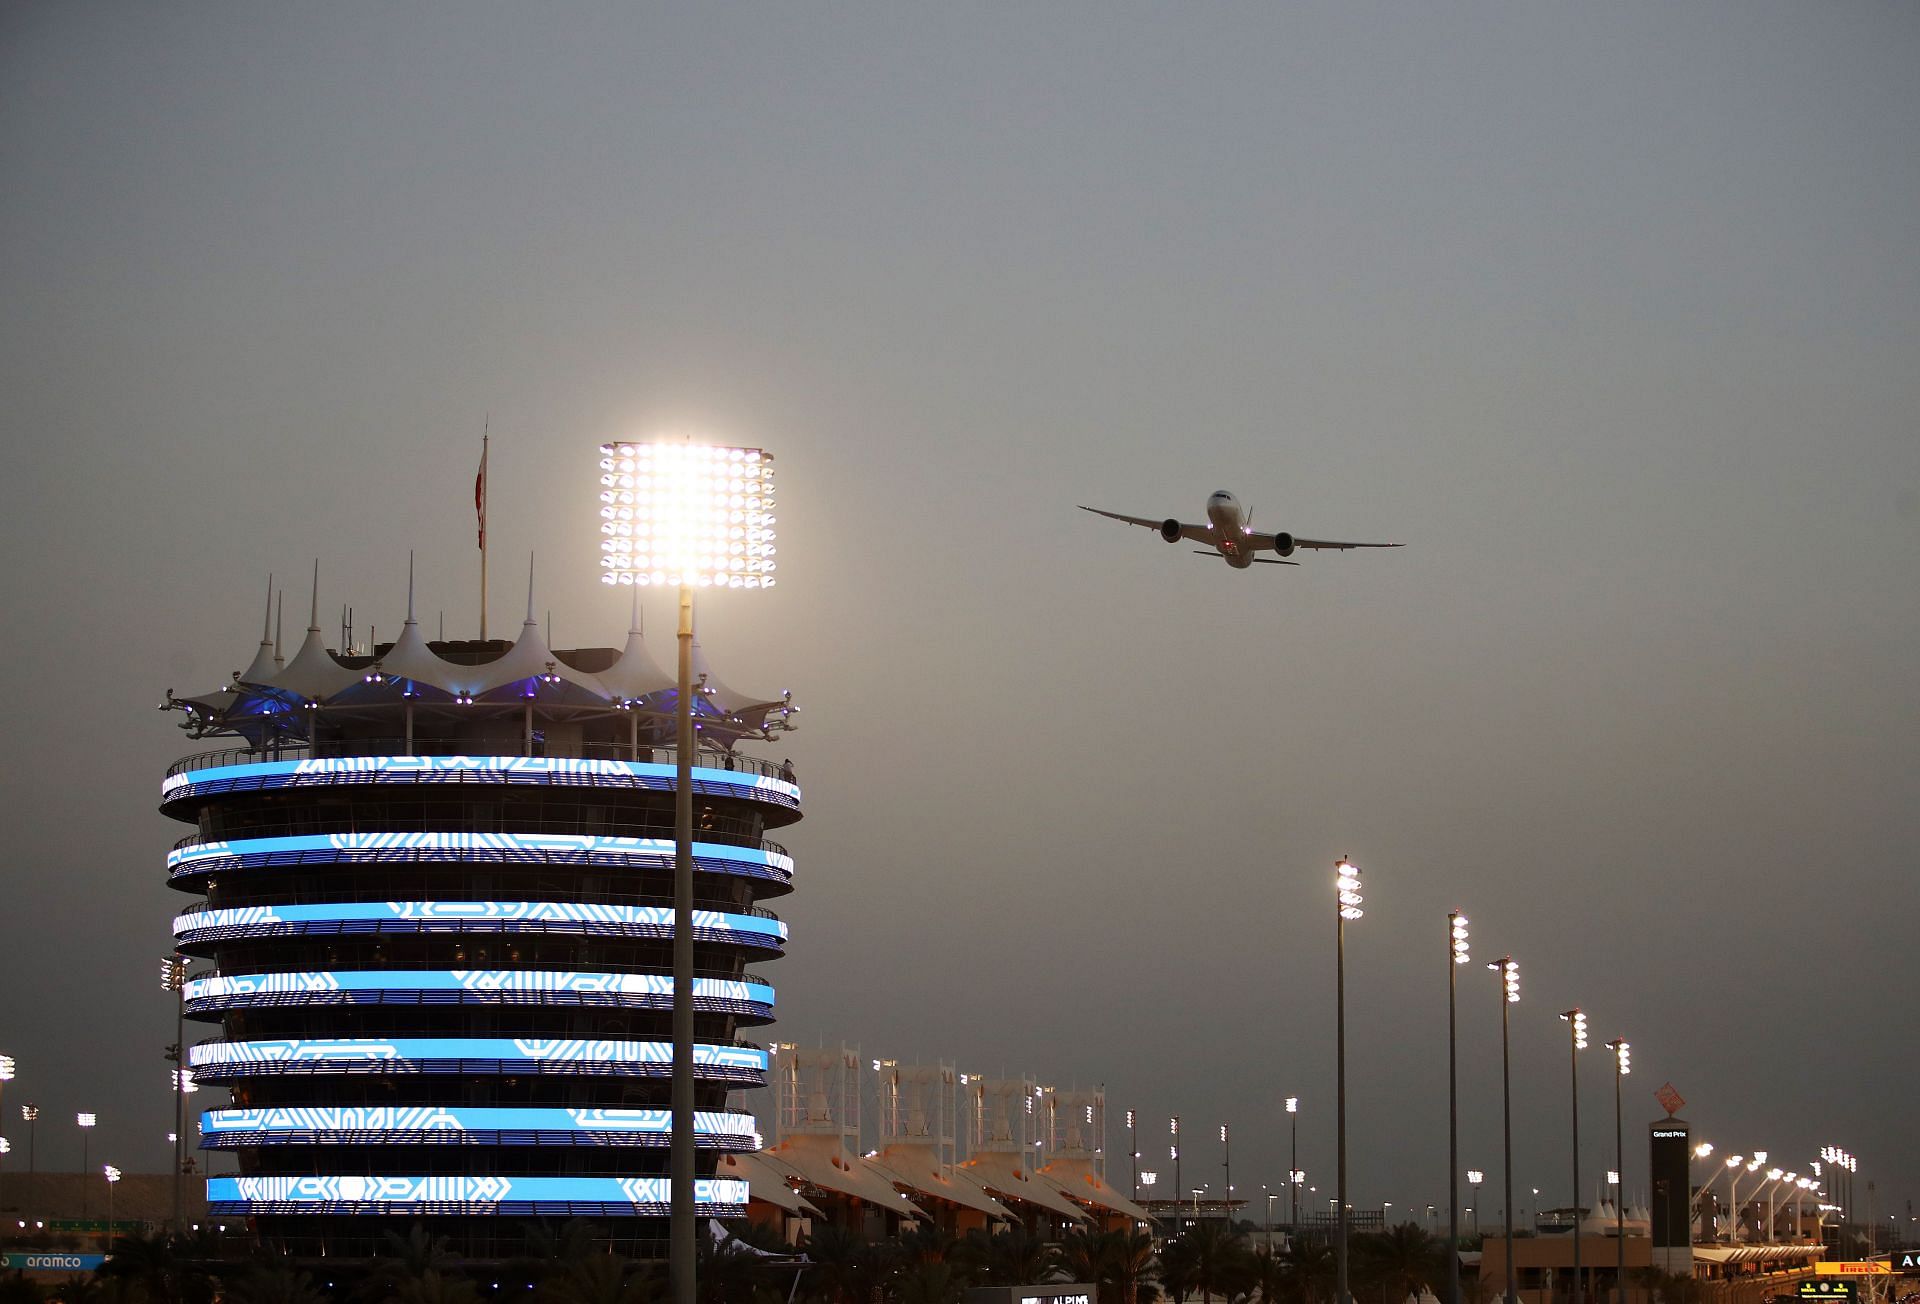 A general view of the Sakhir circuit during the 2021 F1 Grand Prix of Bahrain (Photo by Bryn Lennon/Getty Images)